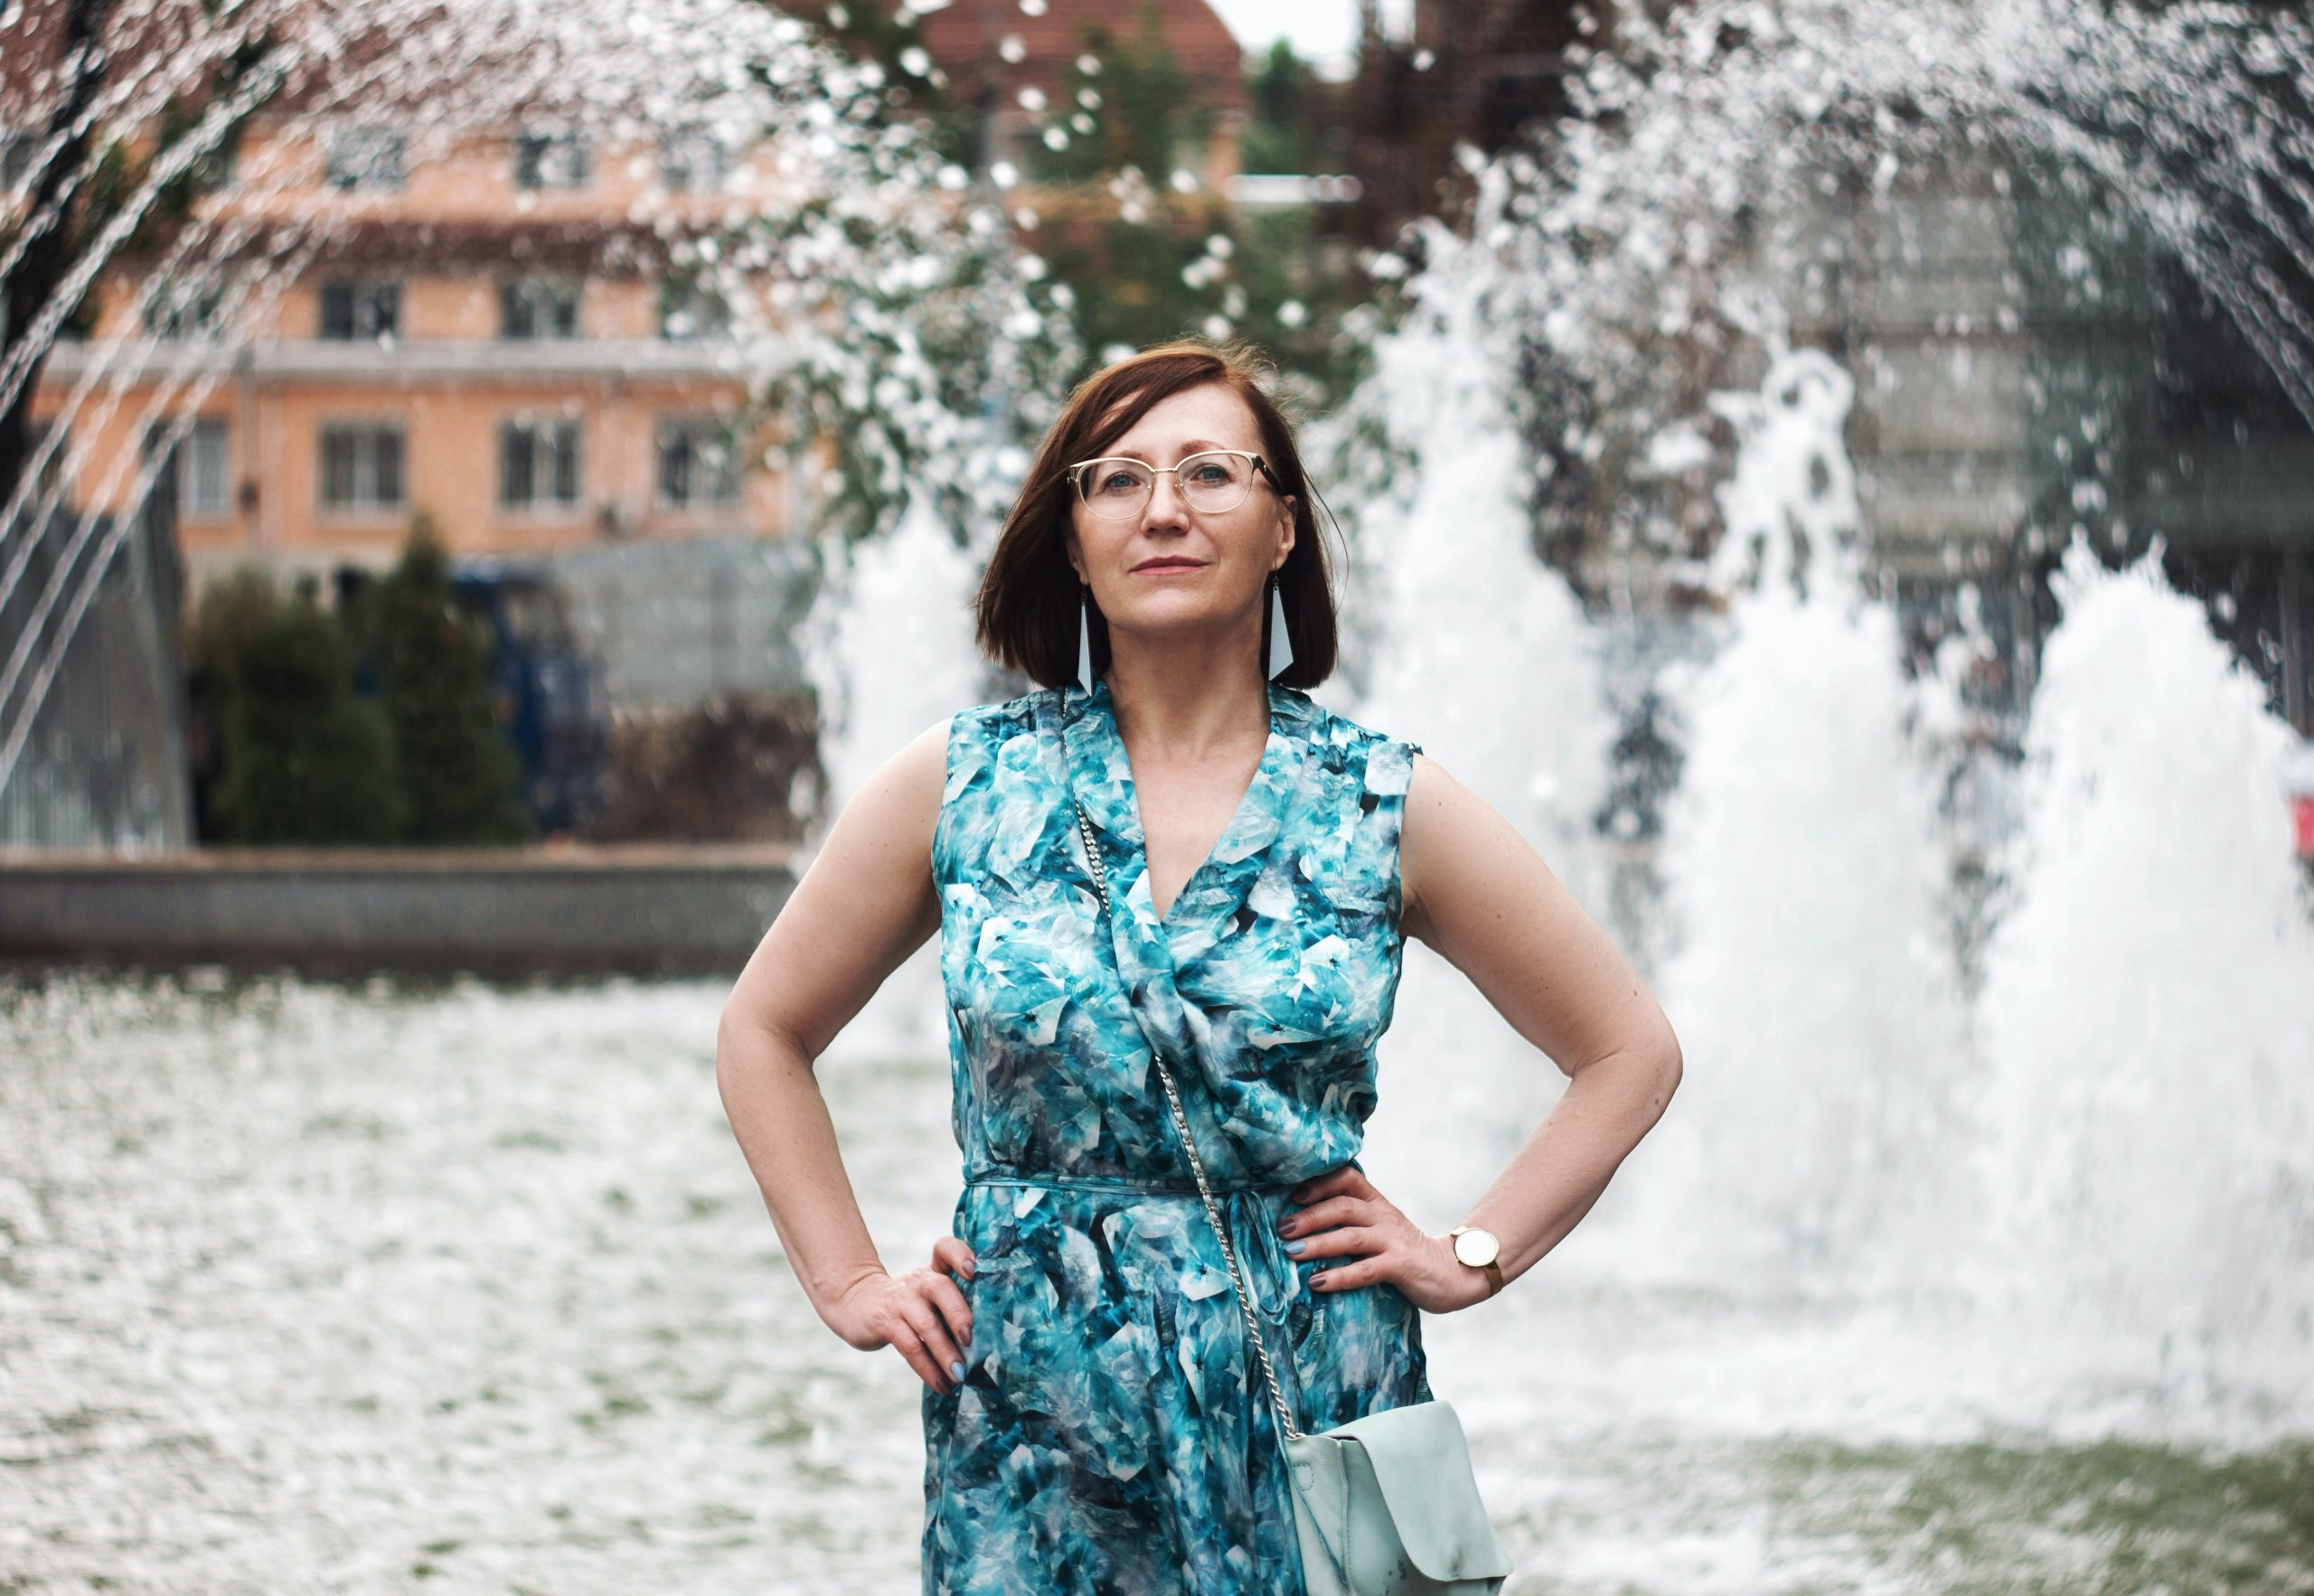 A woman standing in front of a fountain, hands on her hips, facing the camera head on.